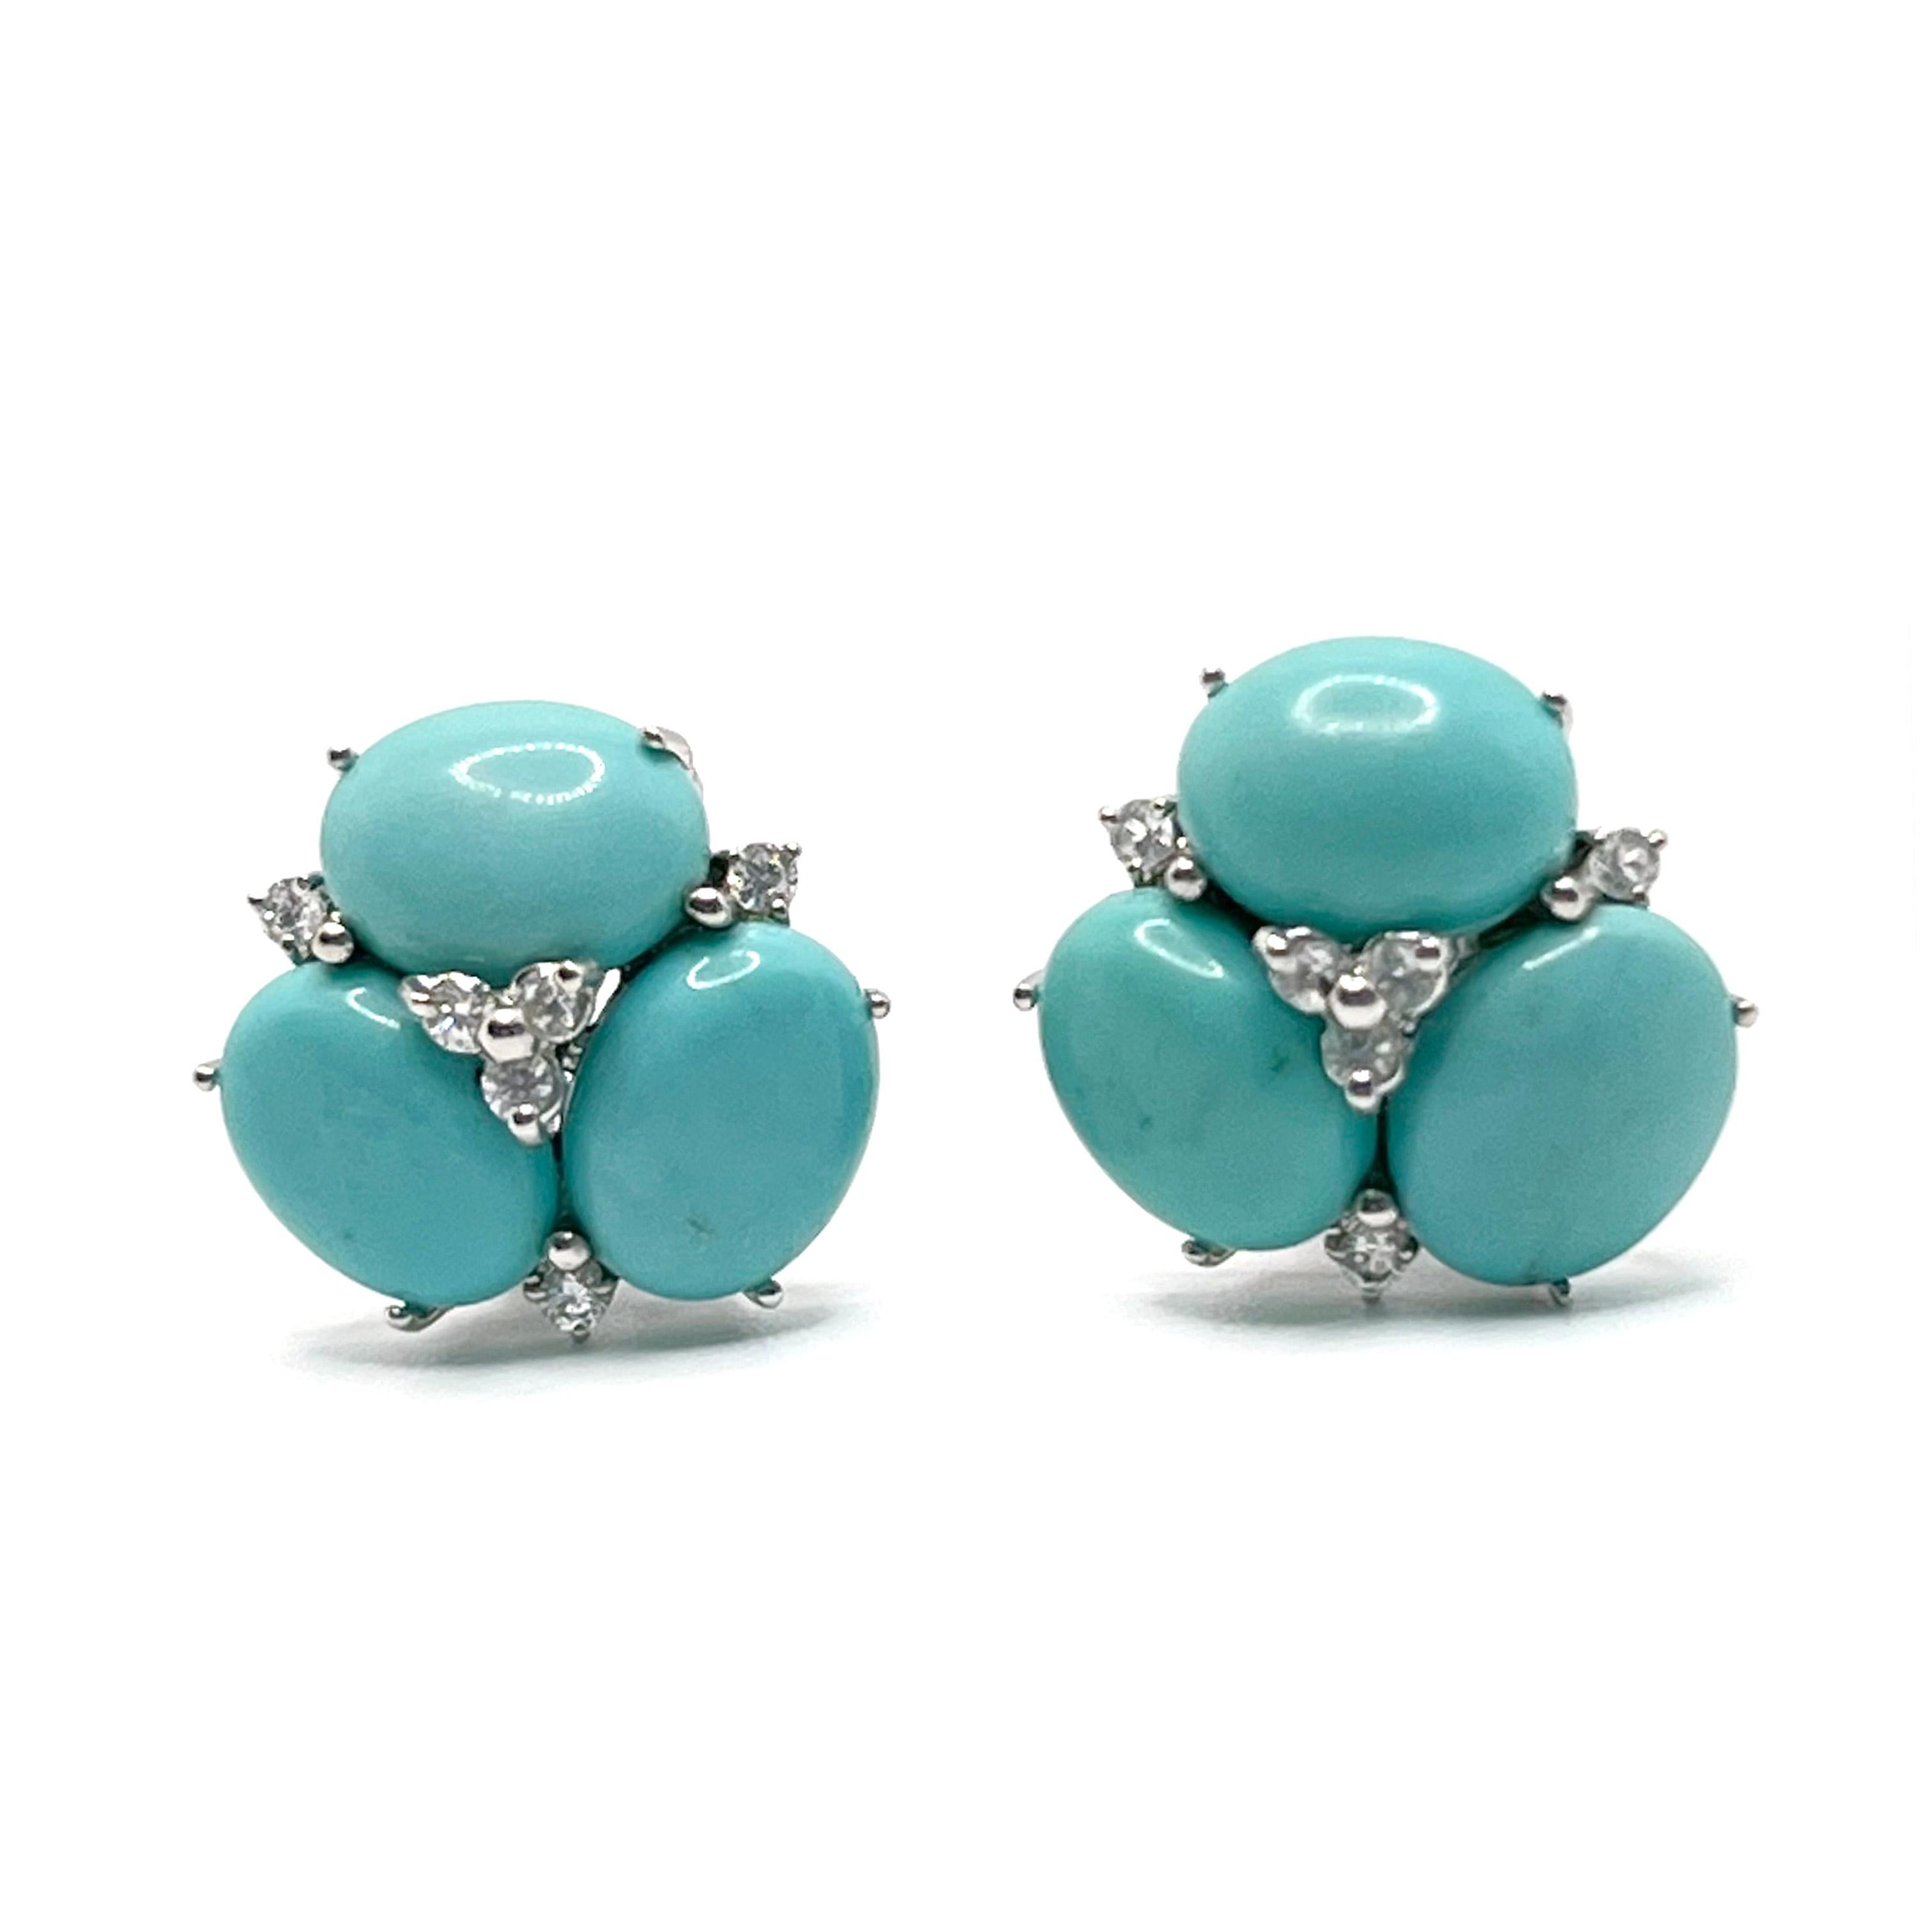 These stunning pair of earrings feature sets of oval cabochon-cut turquoise adorned with round simulated diamonds, handset in platinum rhodium plated sterling silver. The turquoise stones have natural blue-green hue - a striking color that looks so